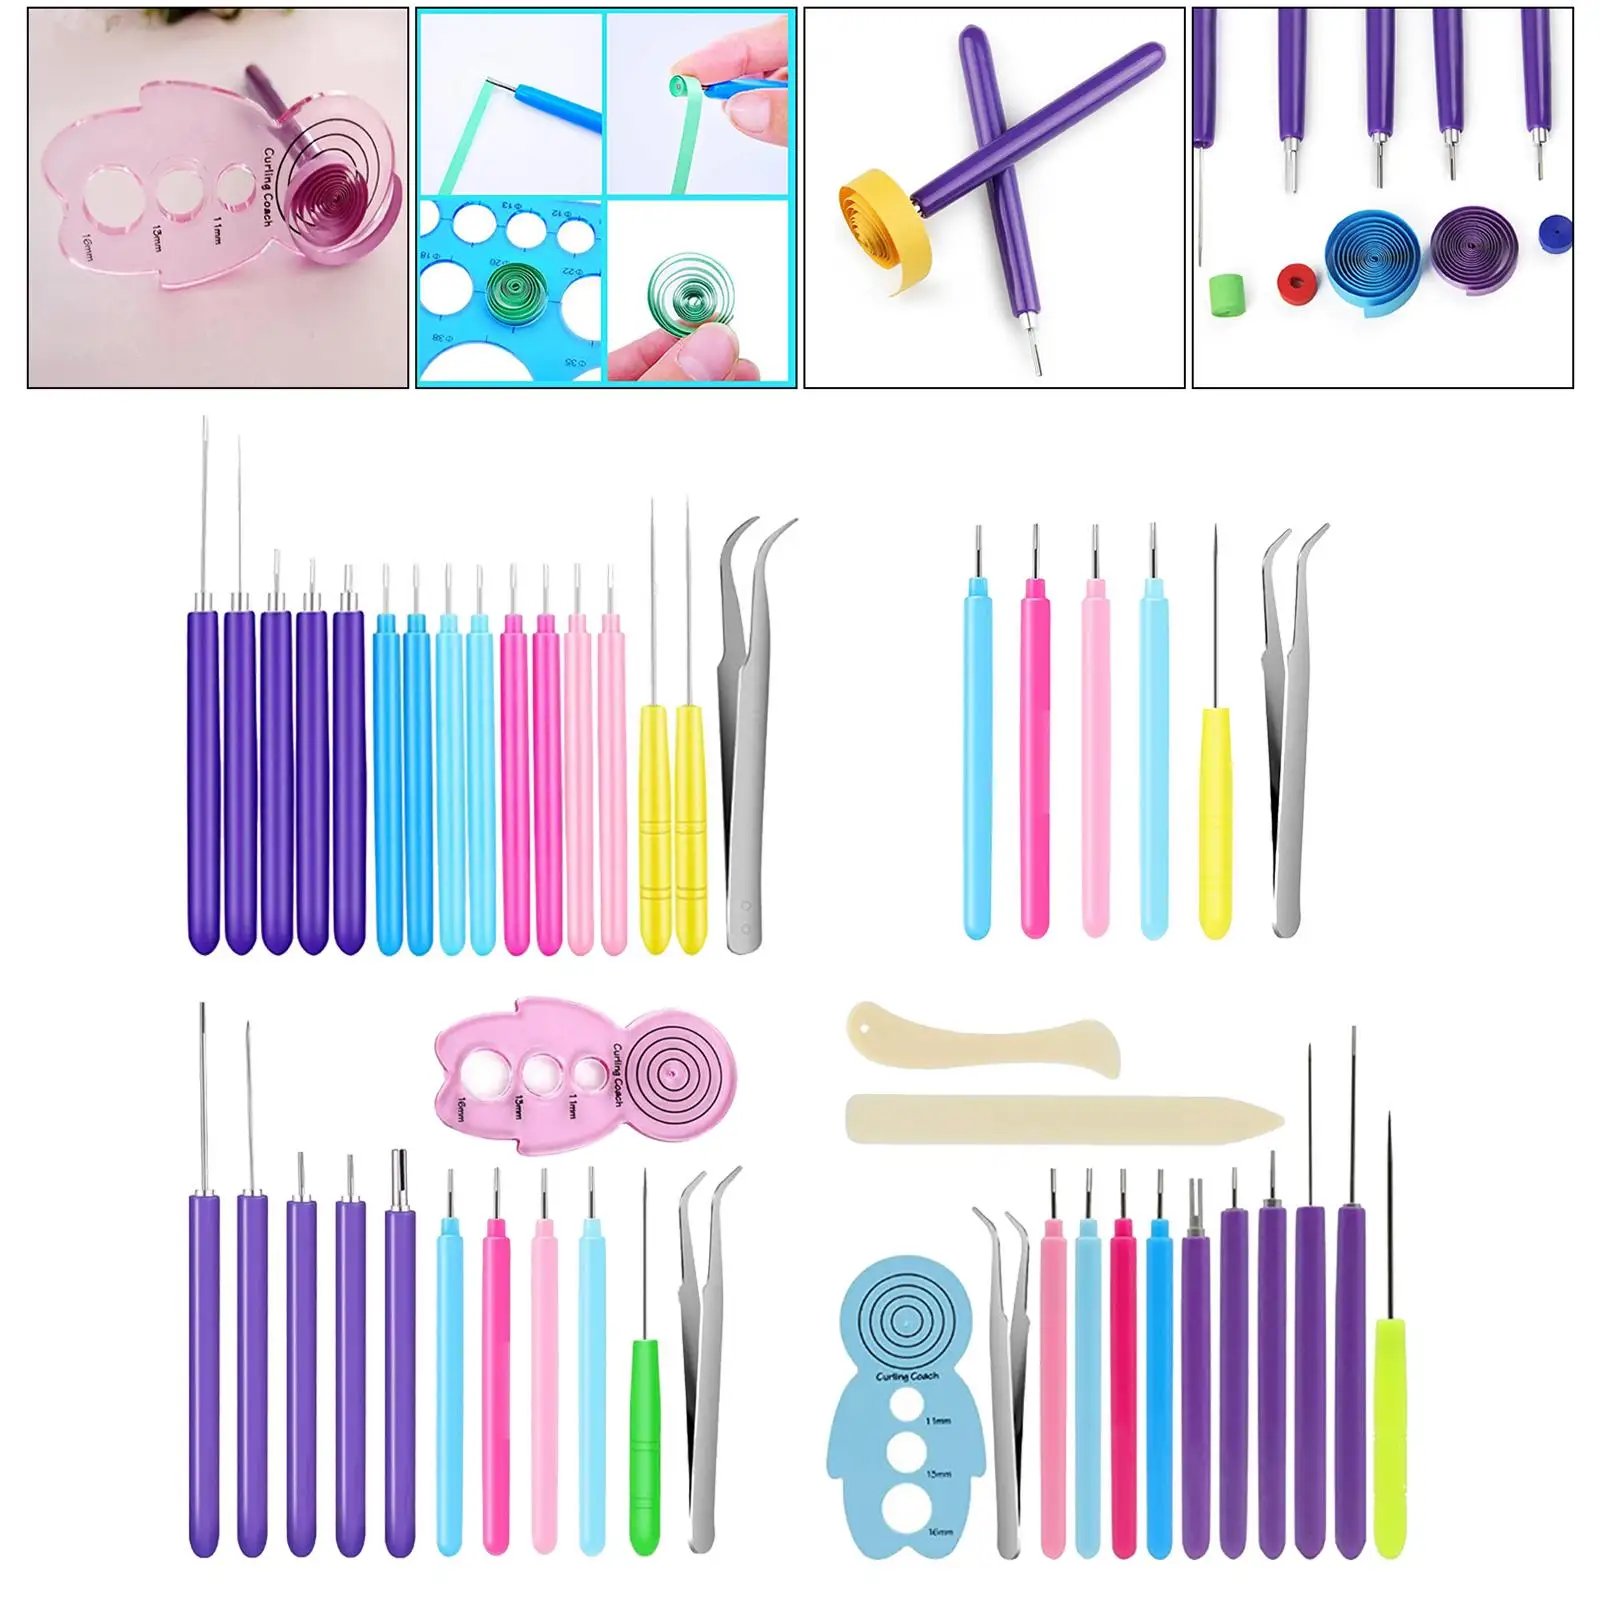 Quilling Tools Slotted Supplies Rolling Tool Set for DIY Beginner Adults